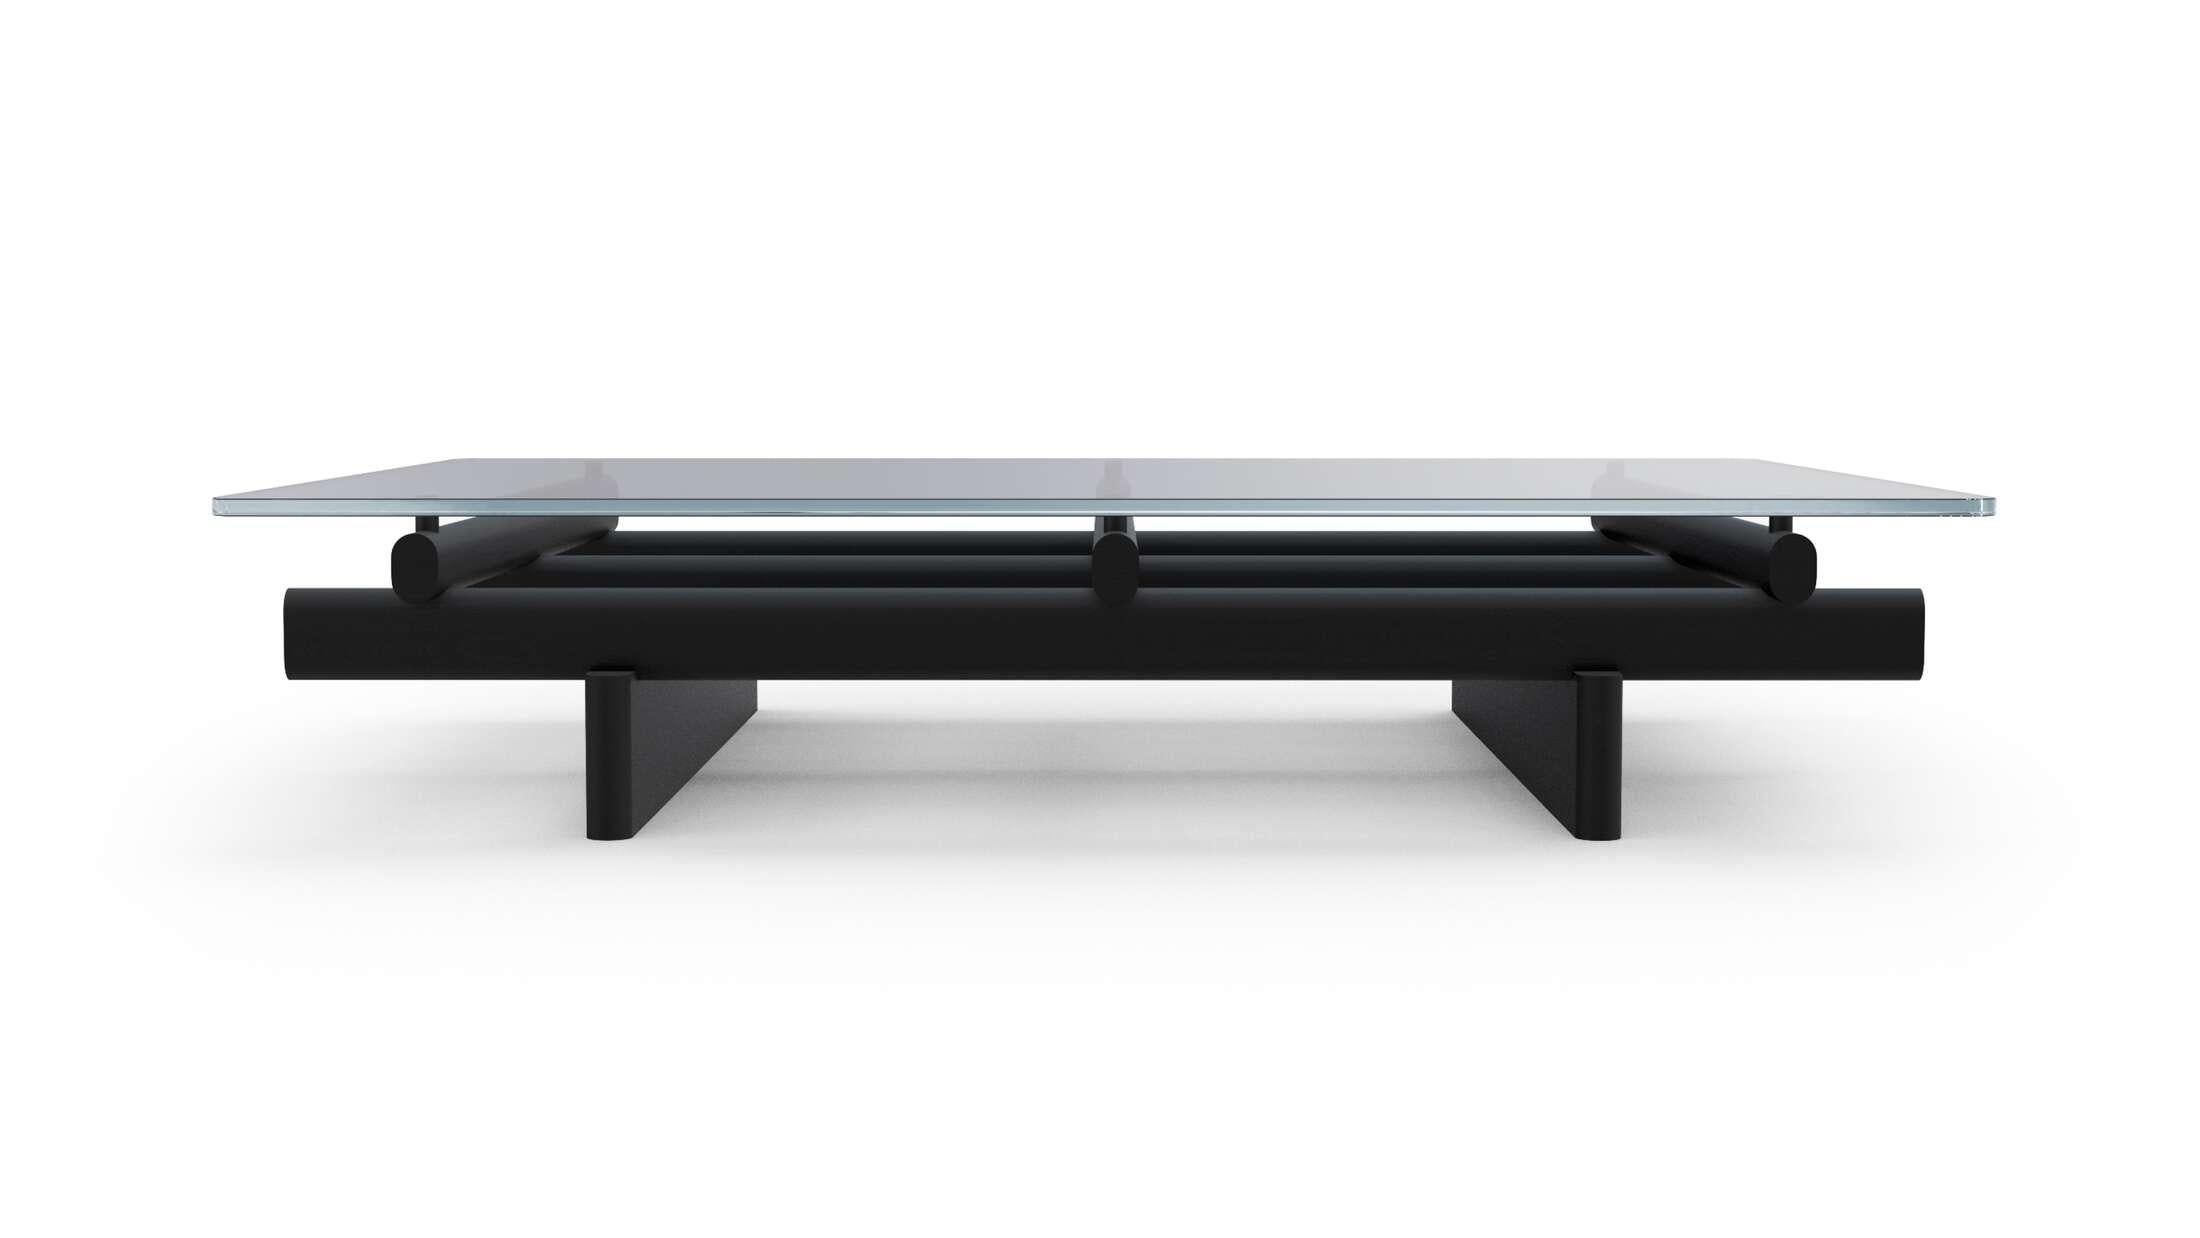 Sengu Coffee Table designed by Patricia Urquiola.
Manufactured by Cassina (Italy).

AN ASIAN INVITATION
Asian-inspired, this design coffee table by Patricia Urquiola is a domestic architecture enhanced by the layering of different materials.

The